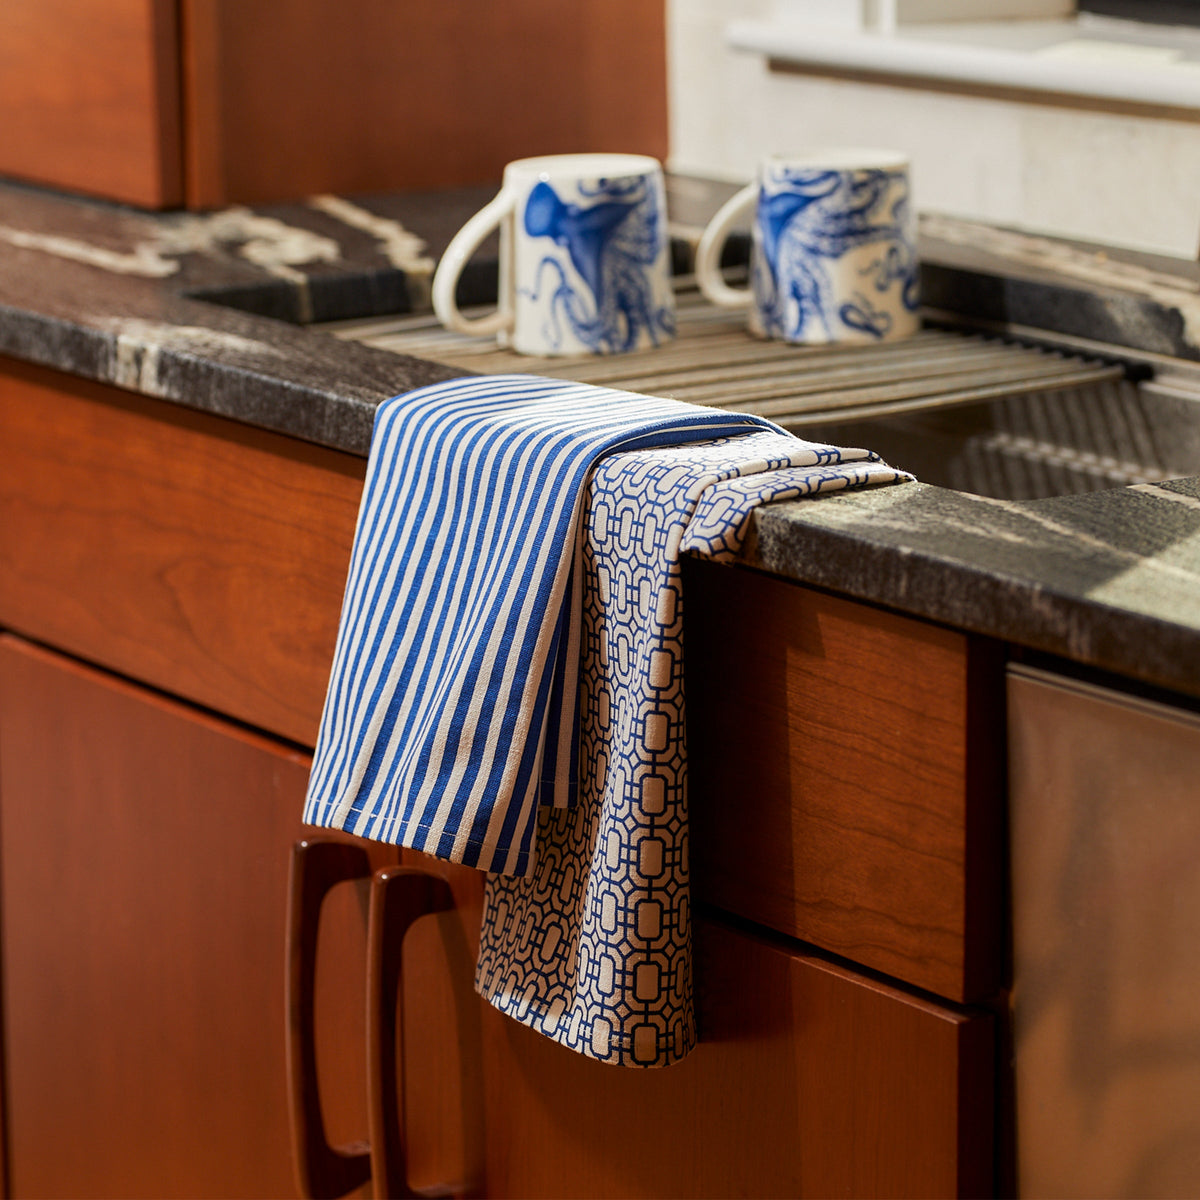 A kitchen sink with two Newport Garden Gate &amp; Pinstripe Blue Kitchen Towels Mixed Set/2 mugs and a towel hanging on it, adorned with blue and white linens.